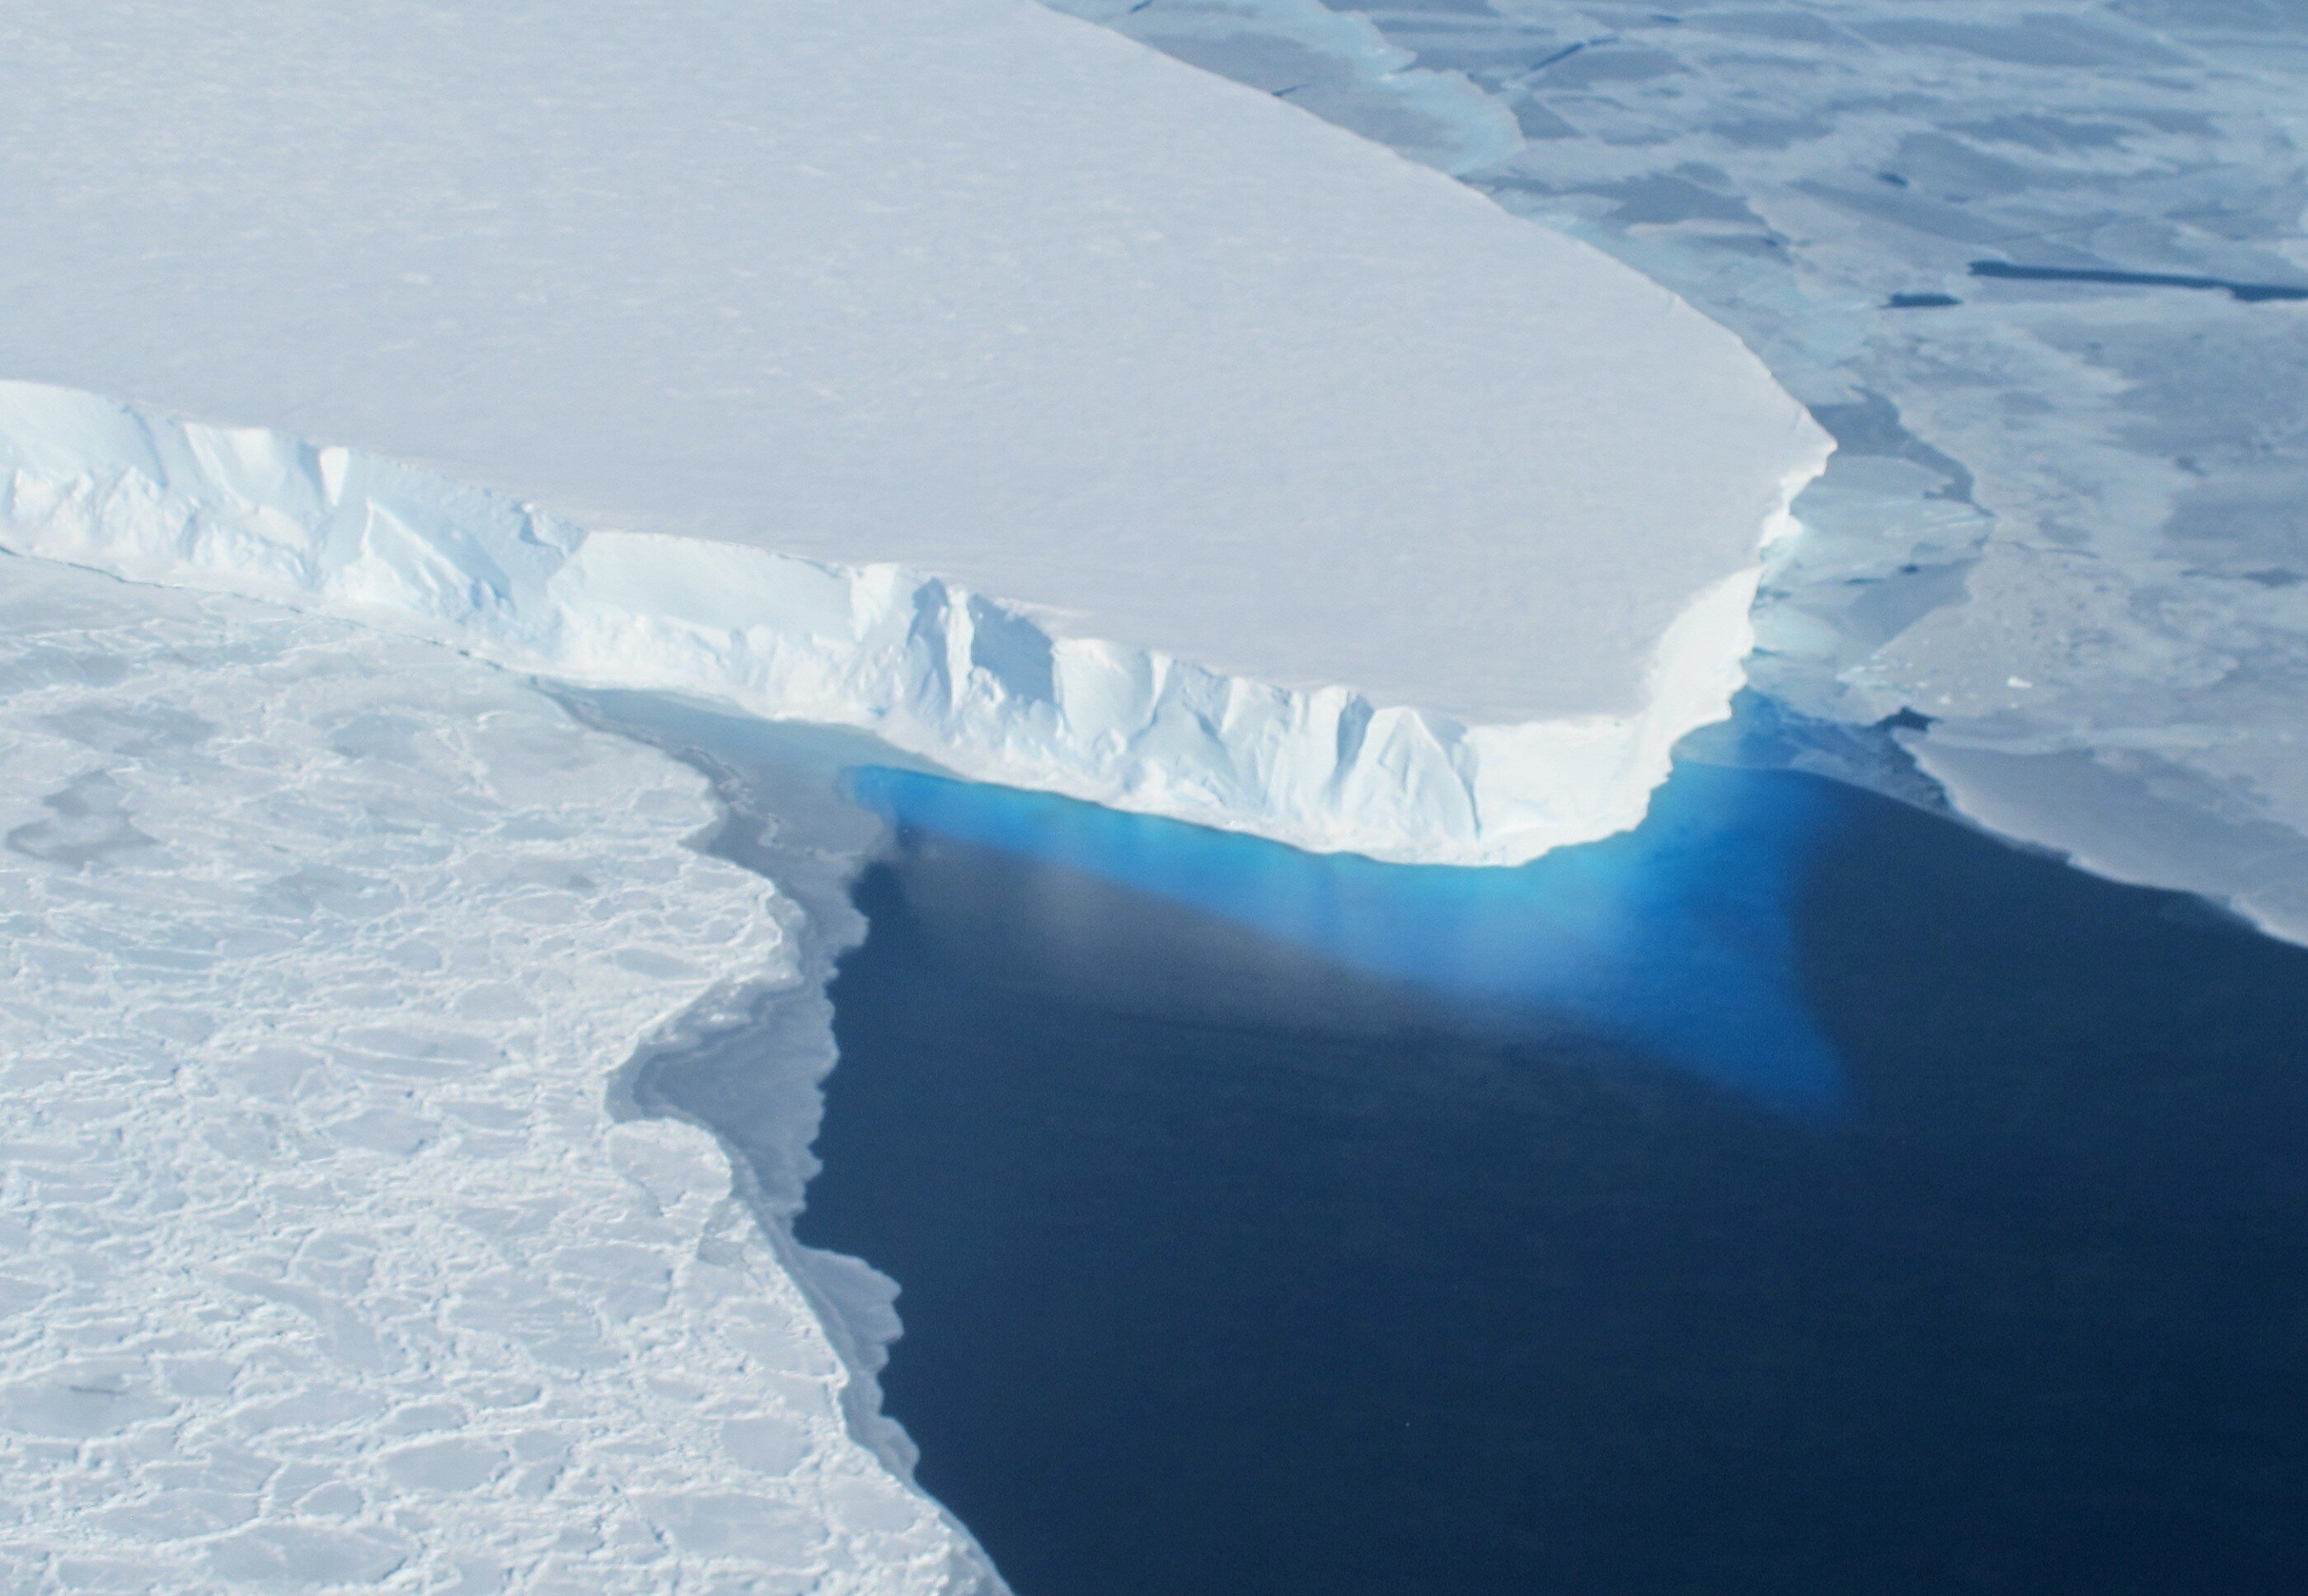 Antarctic glaciers losing ice at fastest rate in 5,500 years, finds study